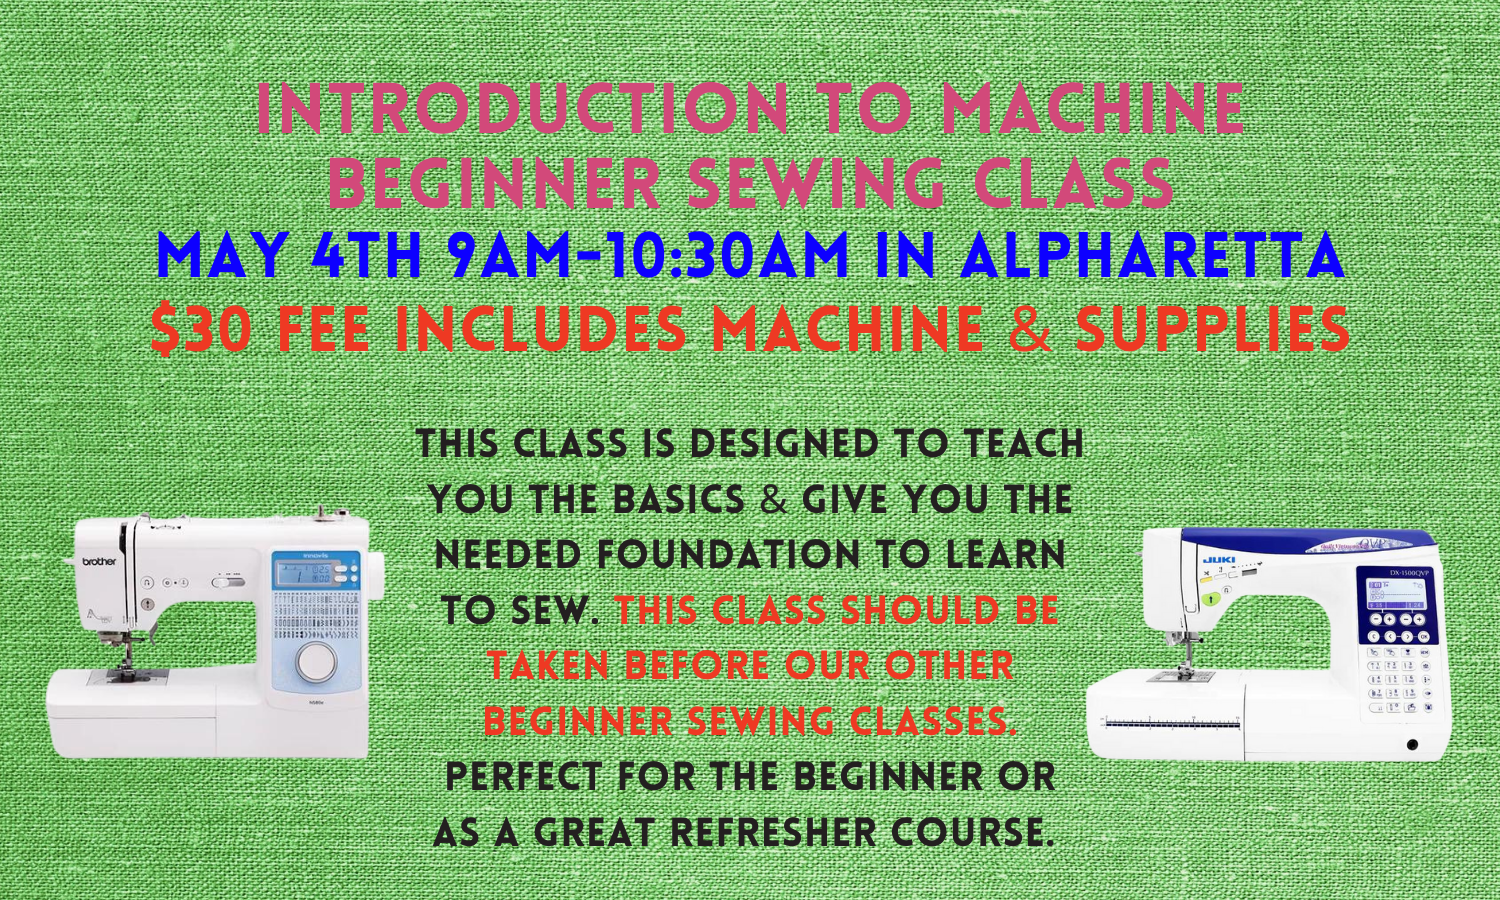 Introduction to Machine Beginner Sewing Class 5/4